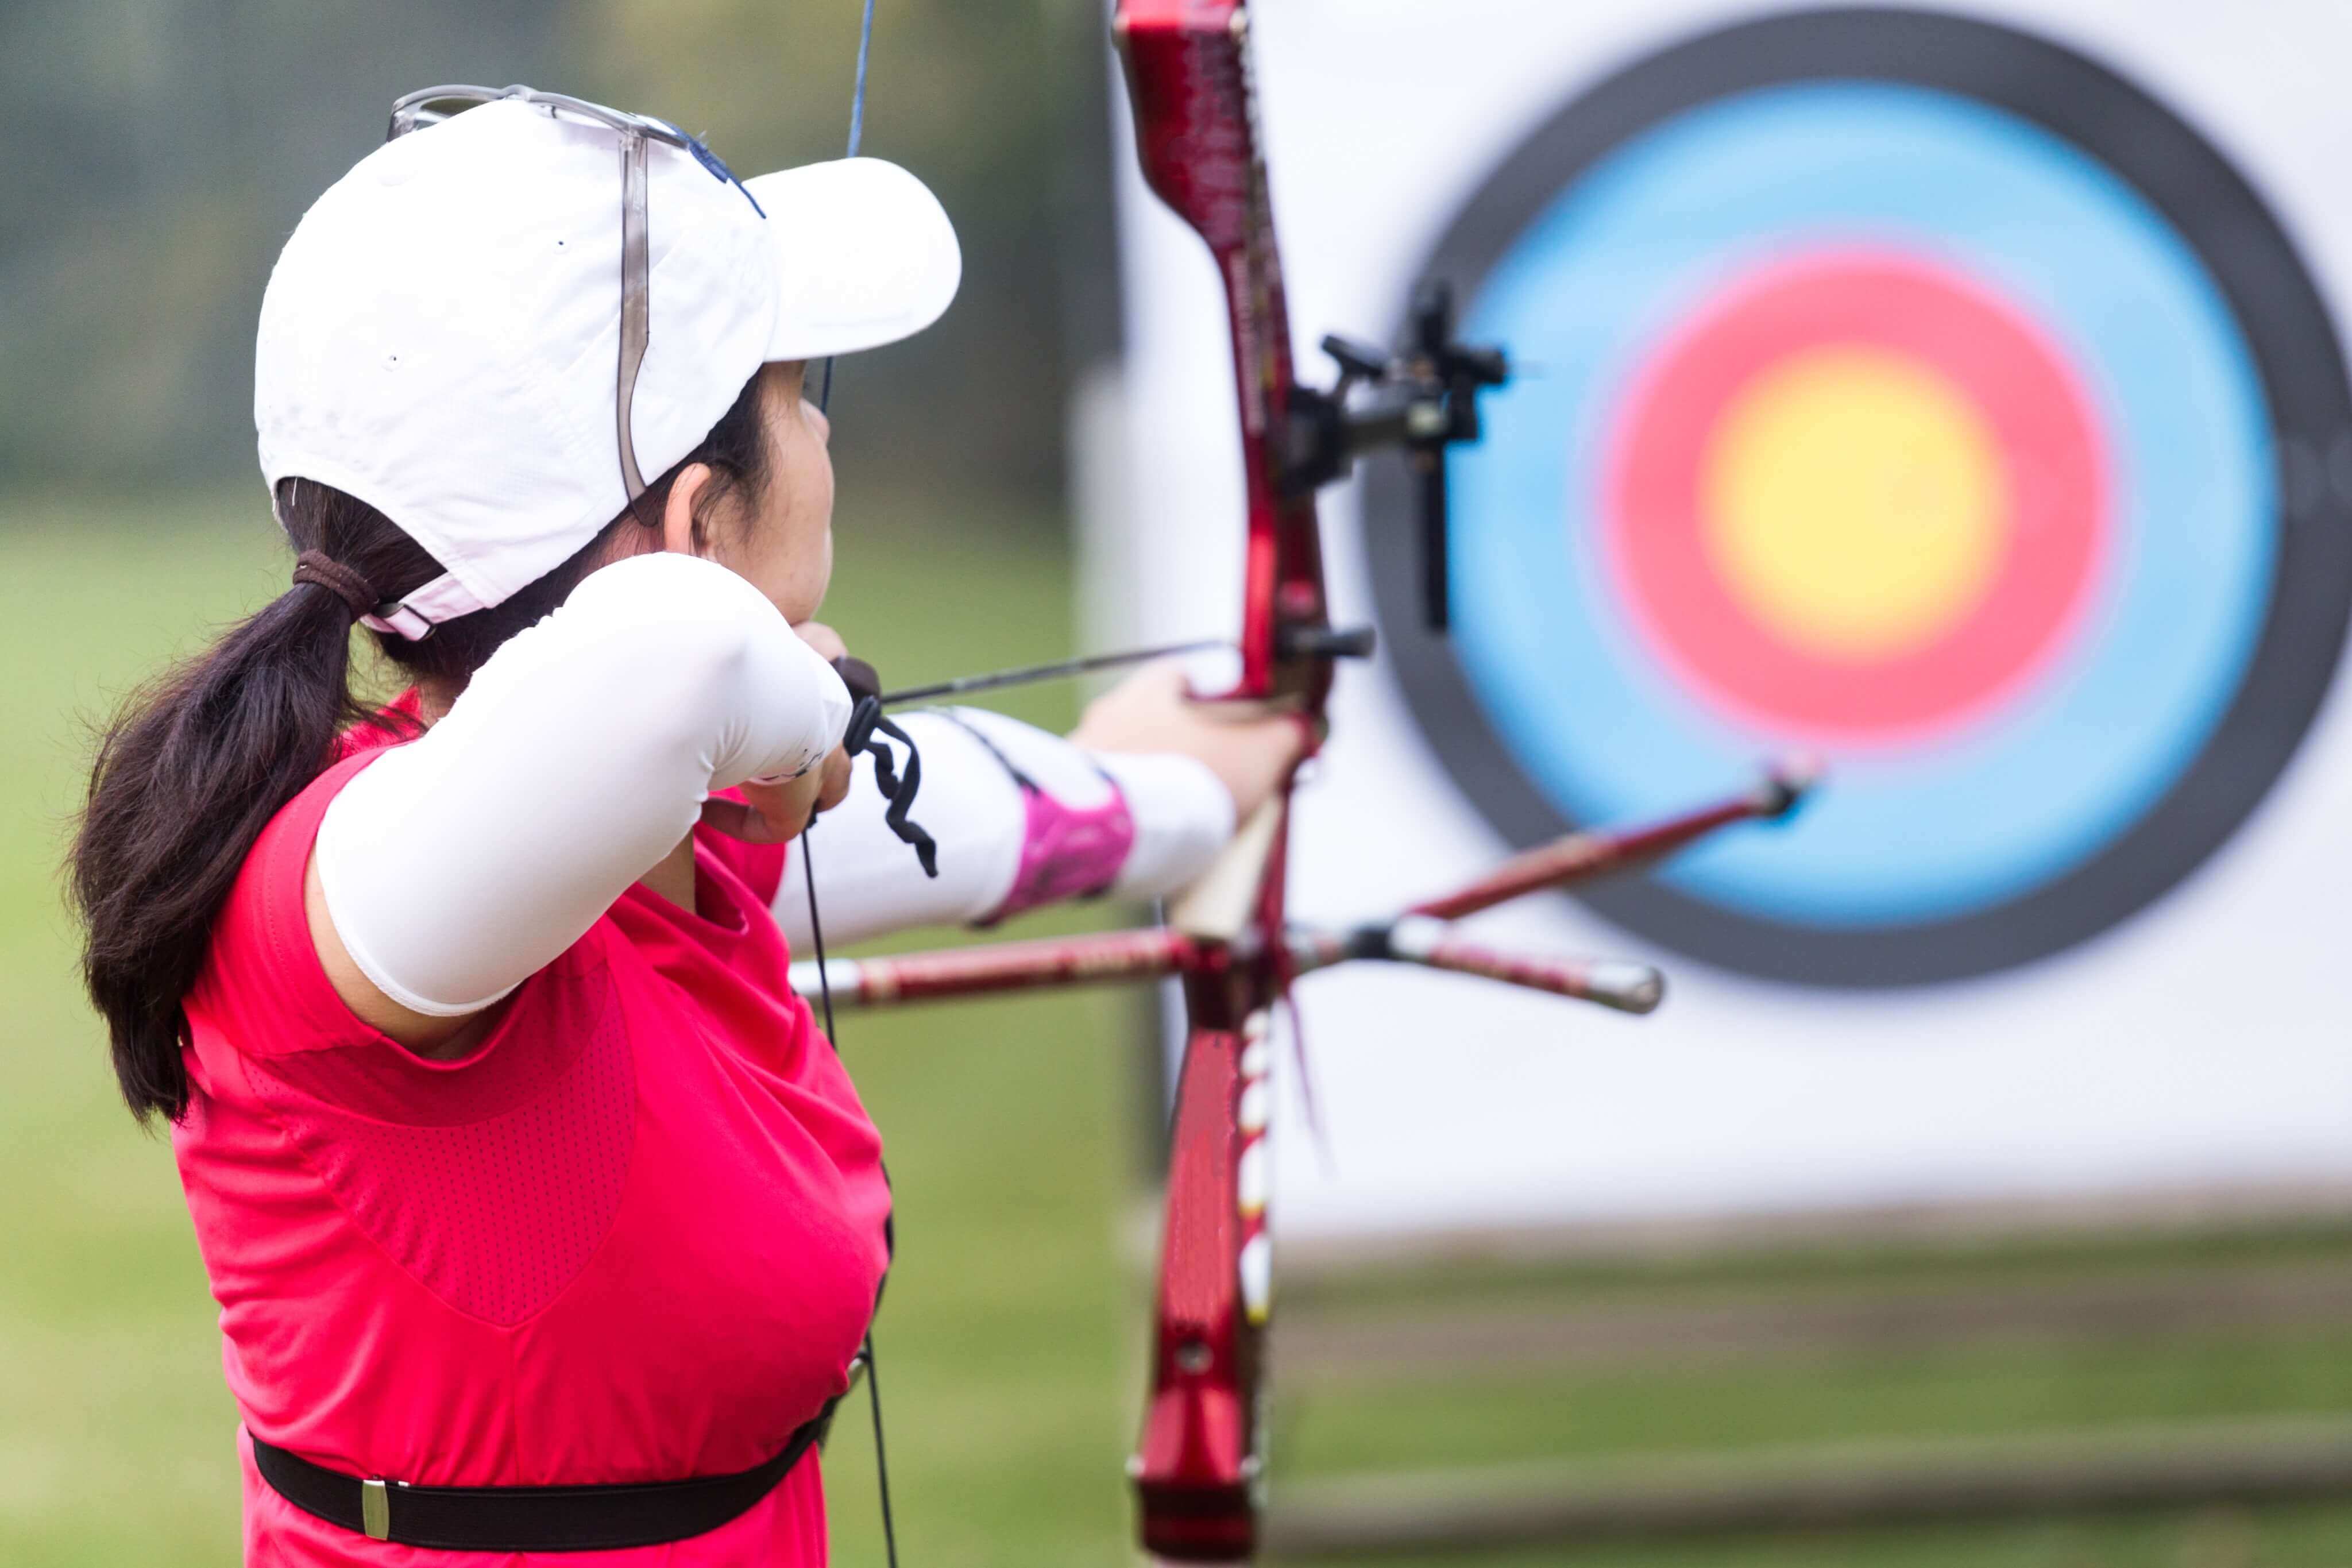 USA Archery pilots use of gamification to increase customer acquisition and engagement